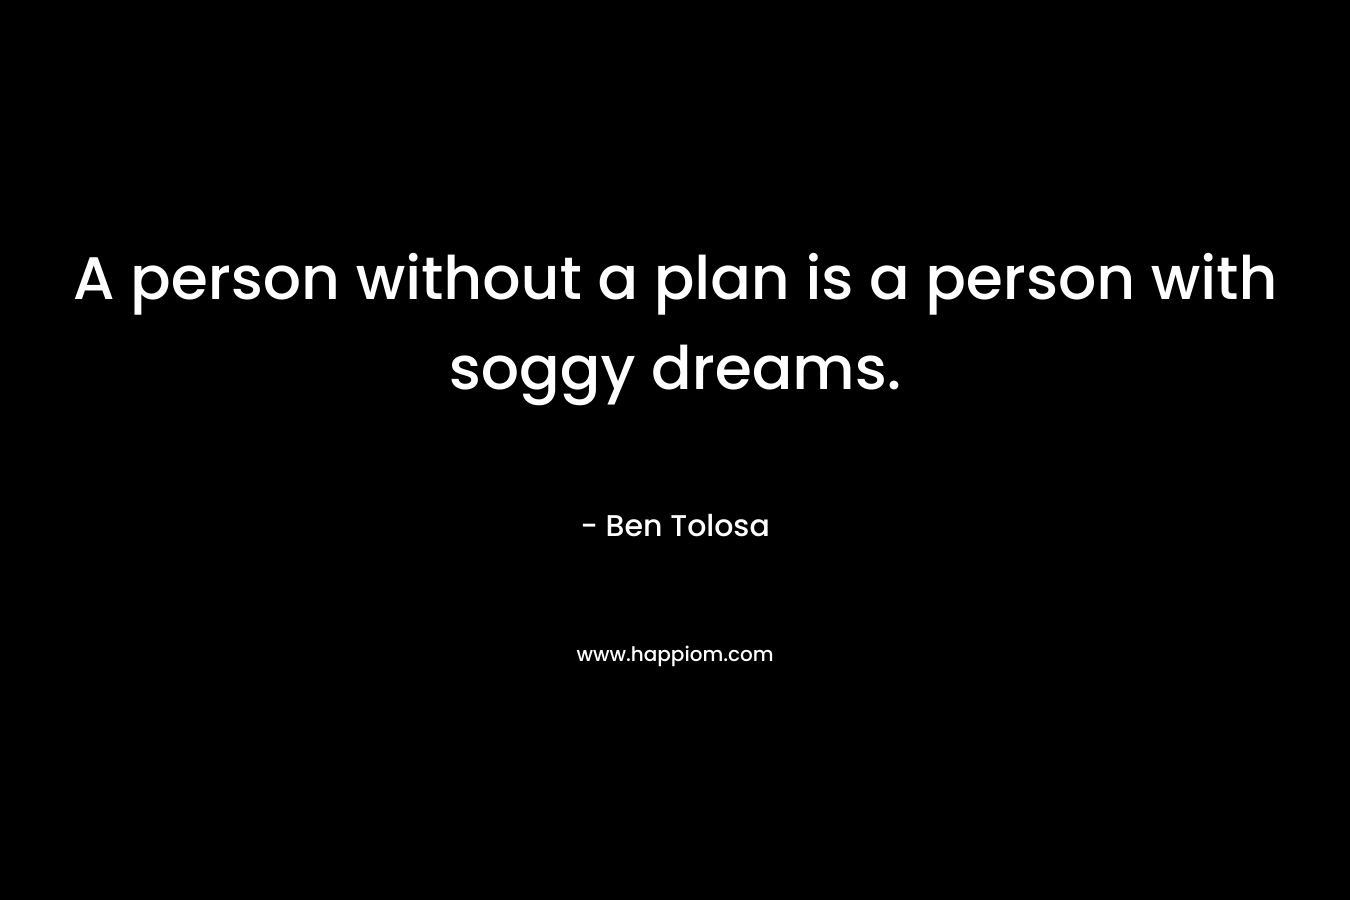 A person without a plan is a person with soggy dreams.